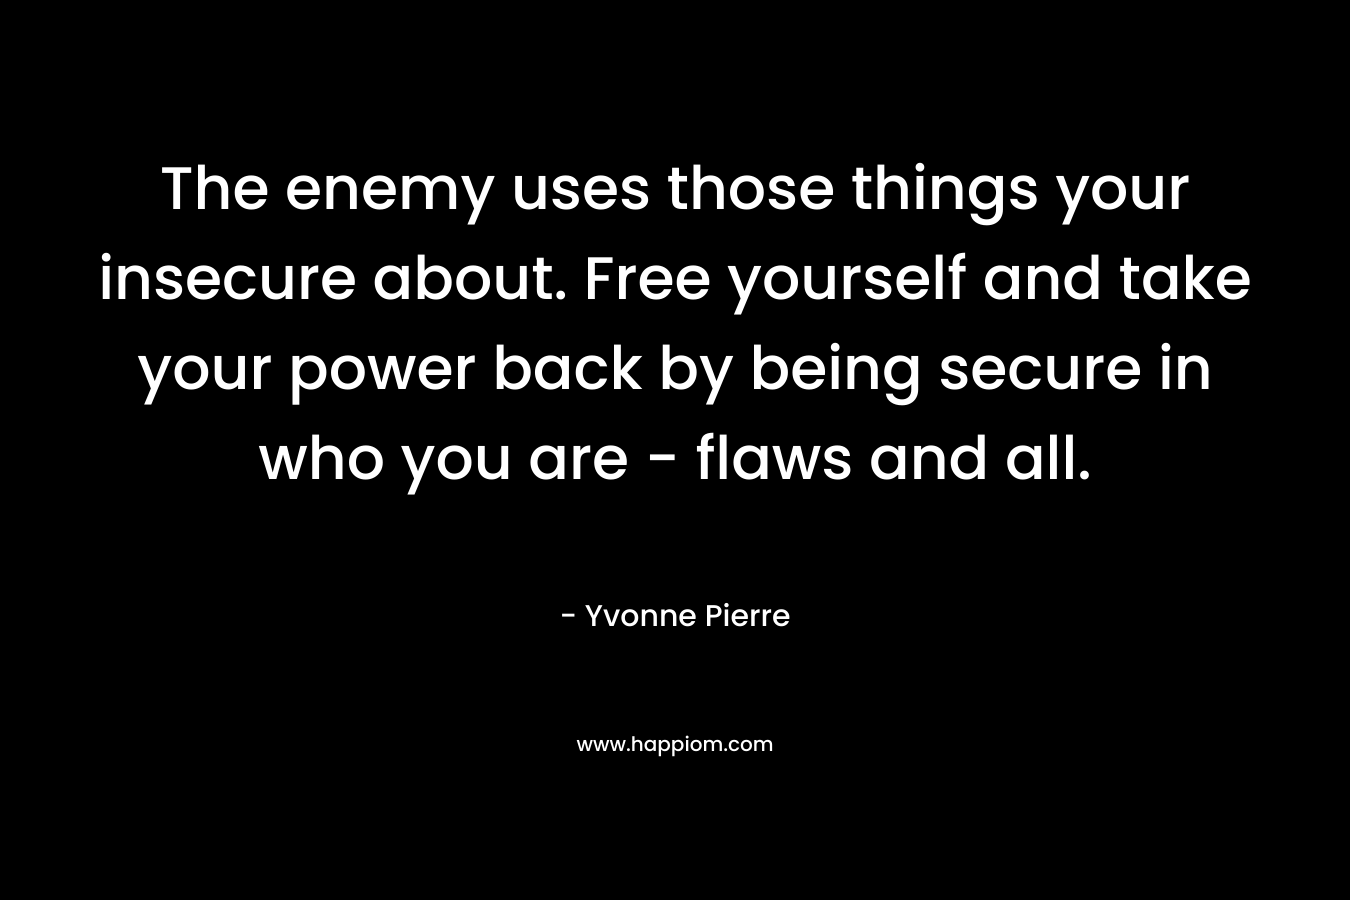 The enemy uses those things your insecure about. Free yourself and take your power back by being secure in who you are - flaws and all.